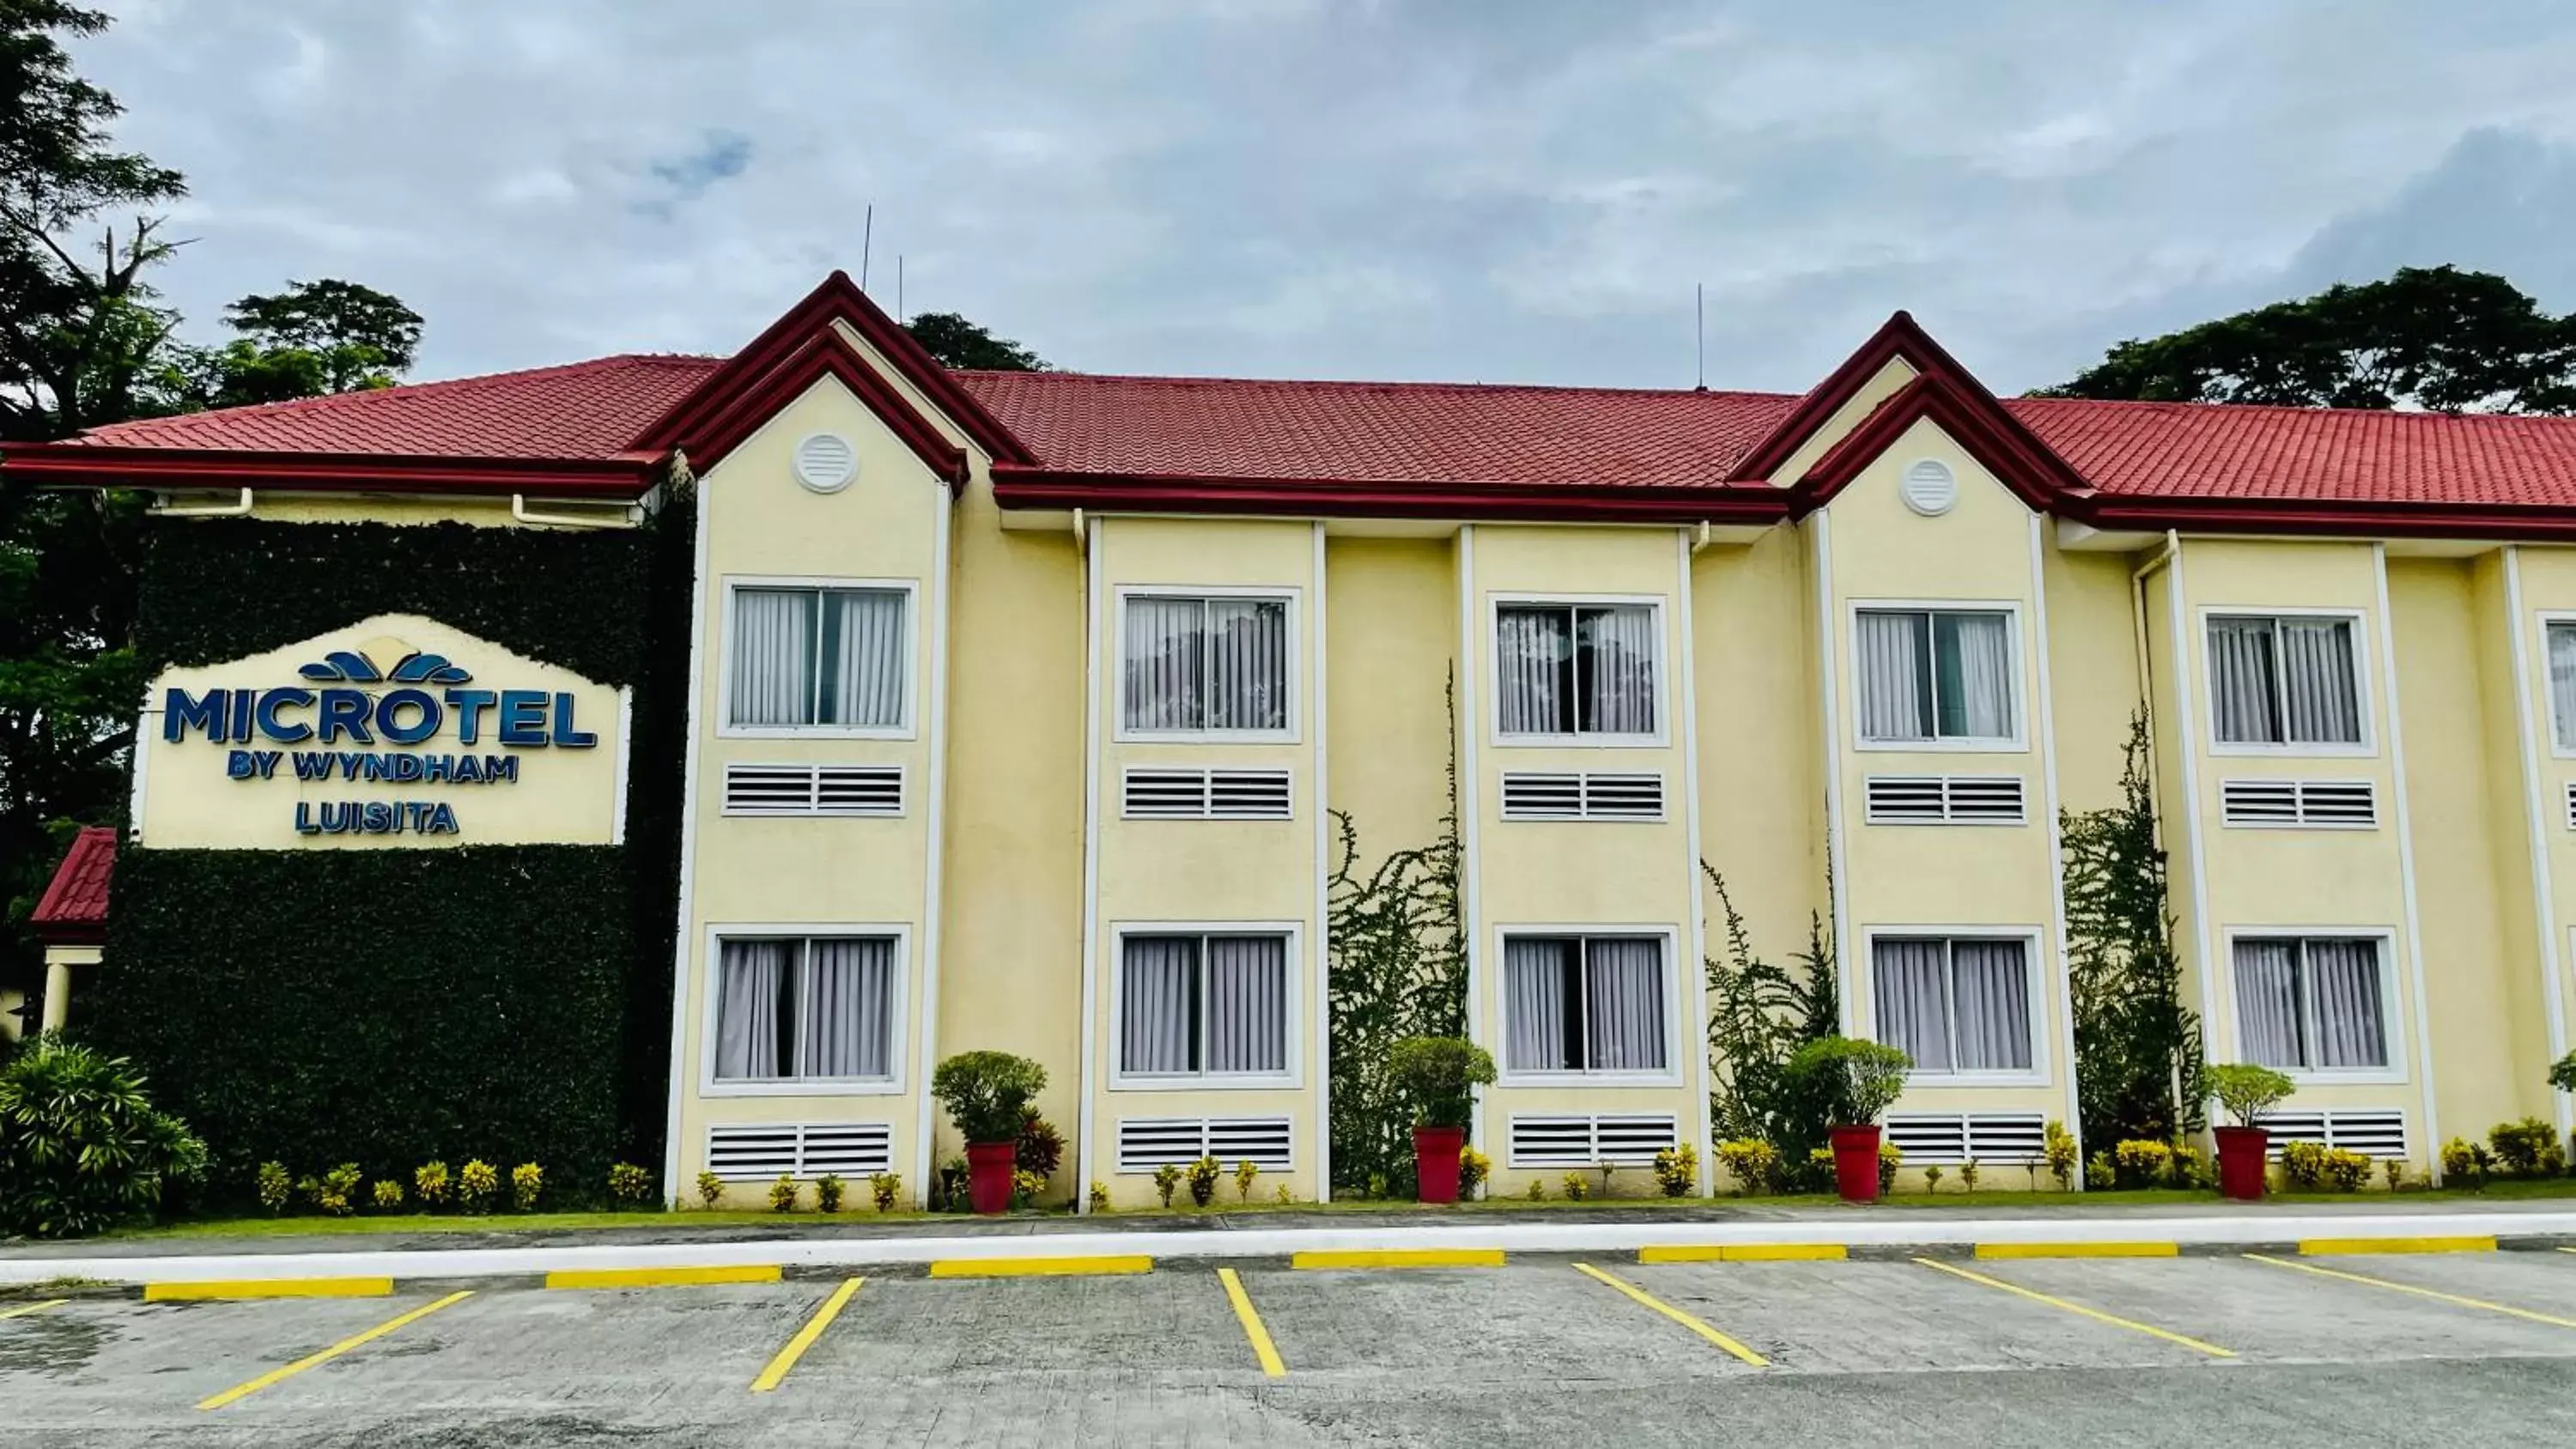 Property Building in Microtel by Wyndham Tarlac